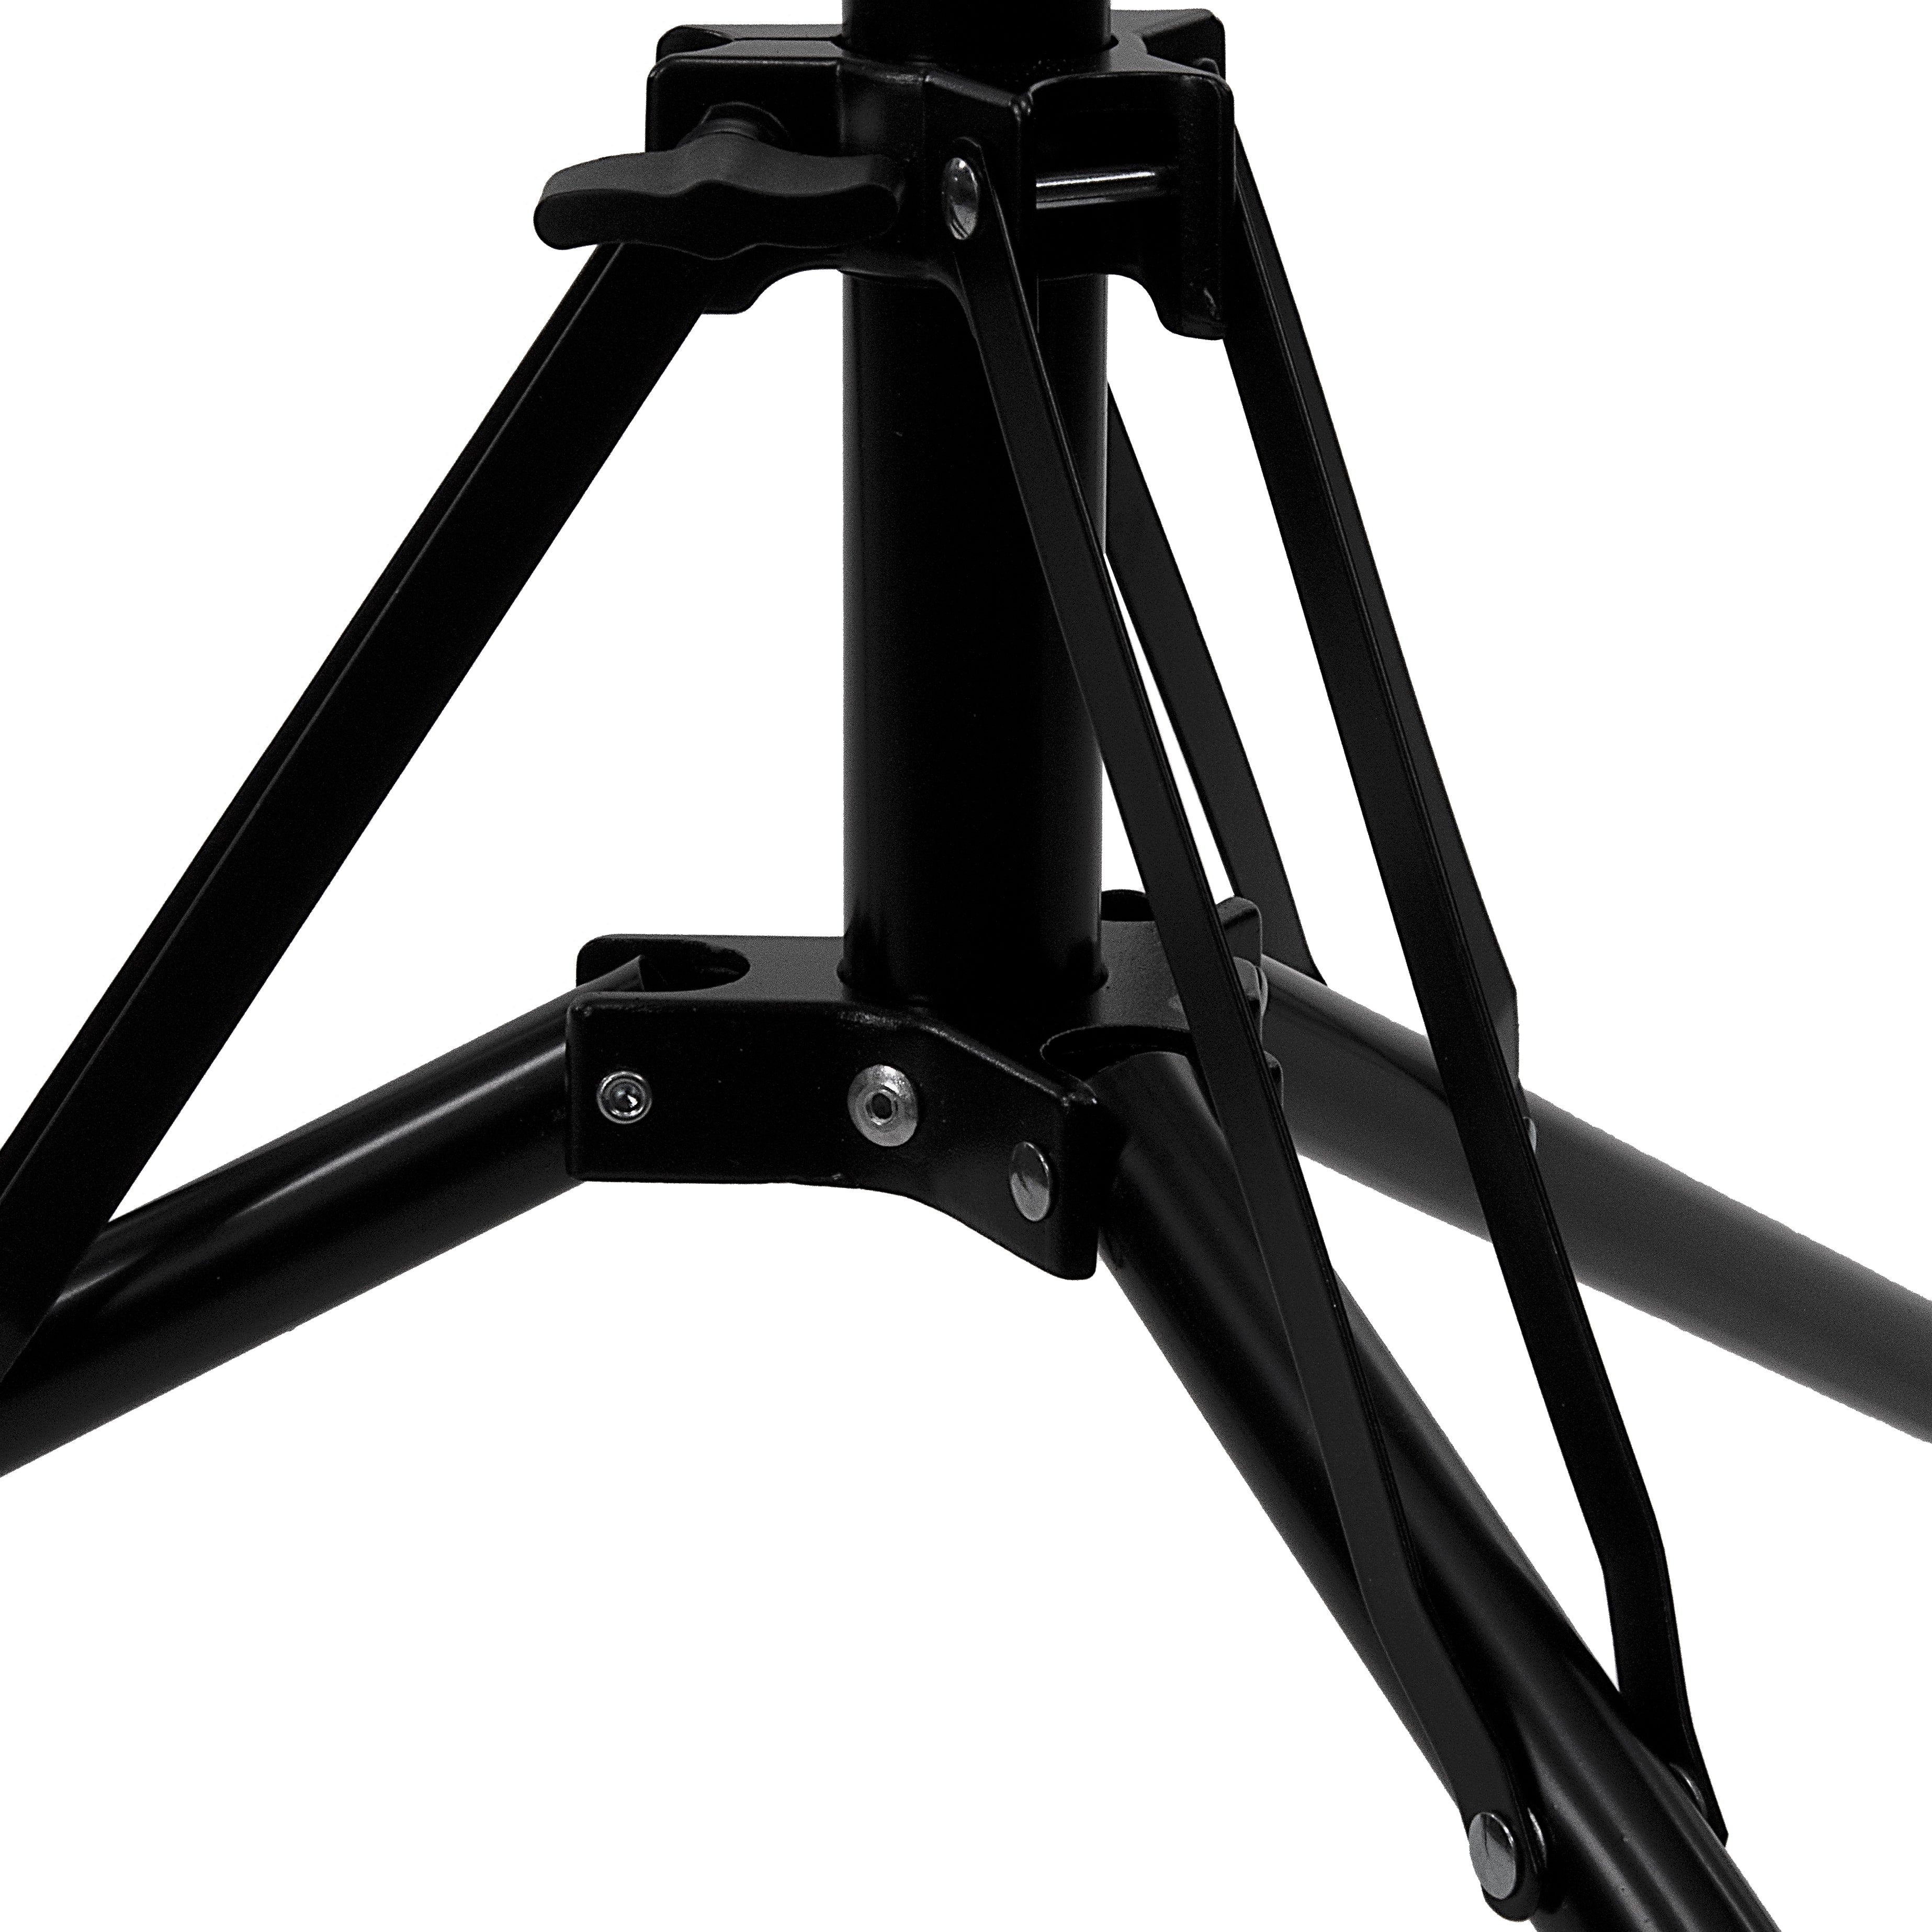 Fotodiox Compact Light Stand - 5'6" Stand for Studio Strobe and Lighting Fixtures